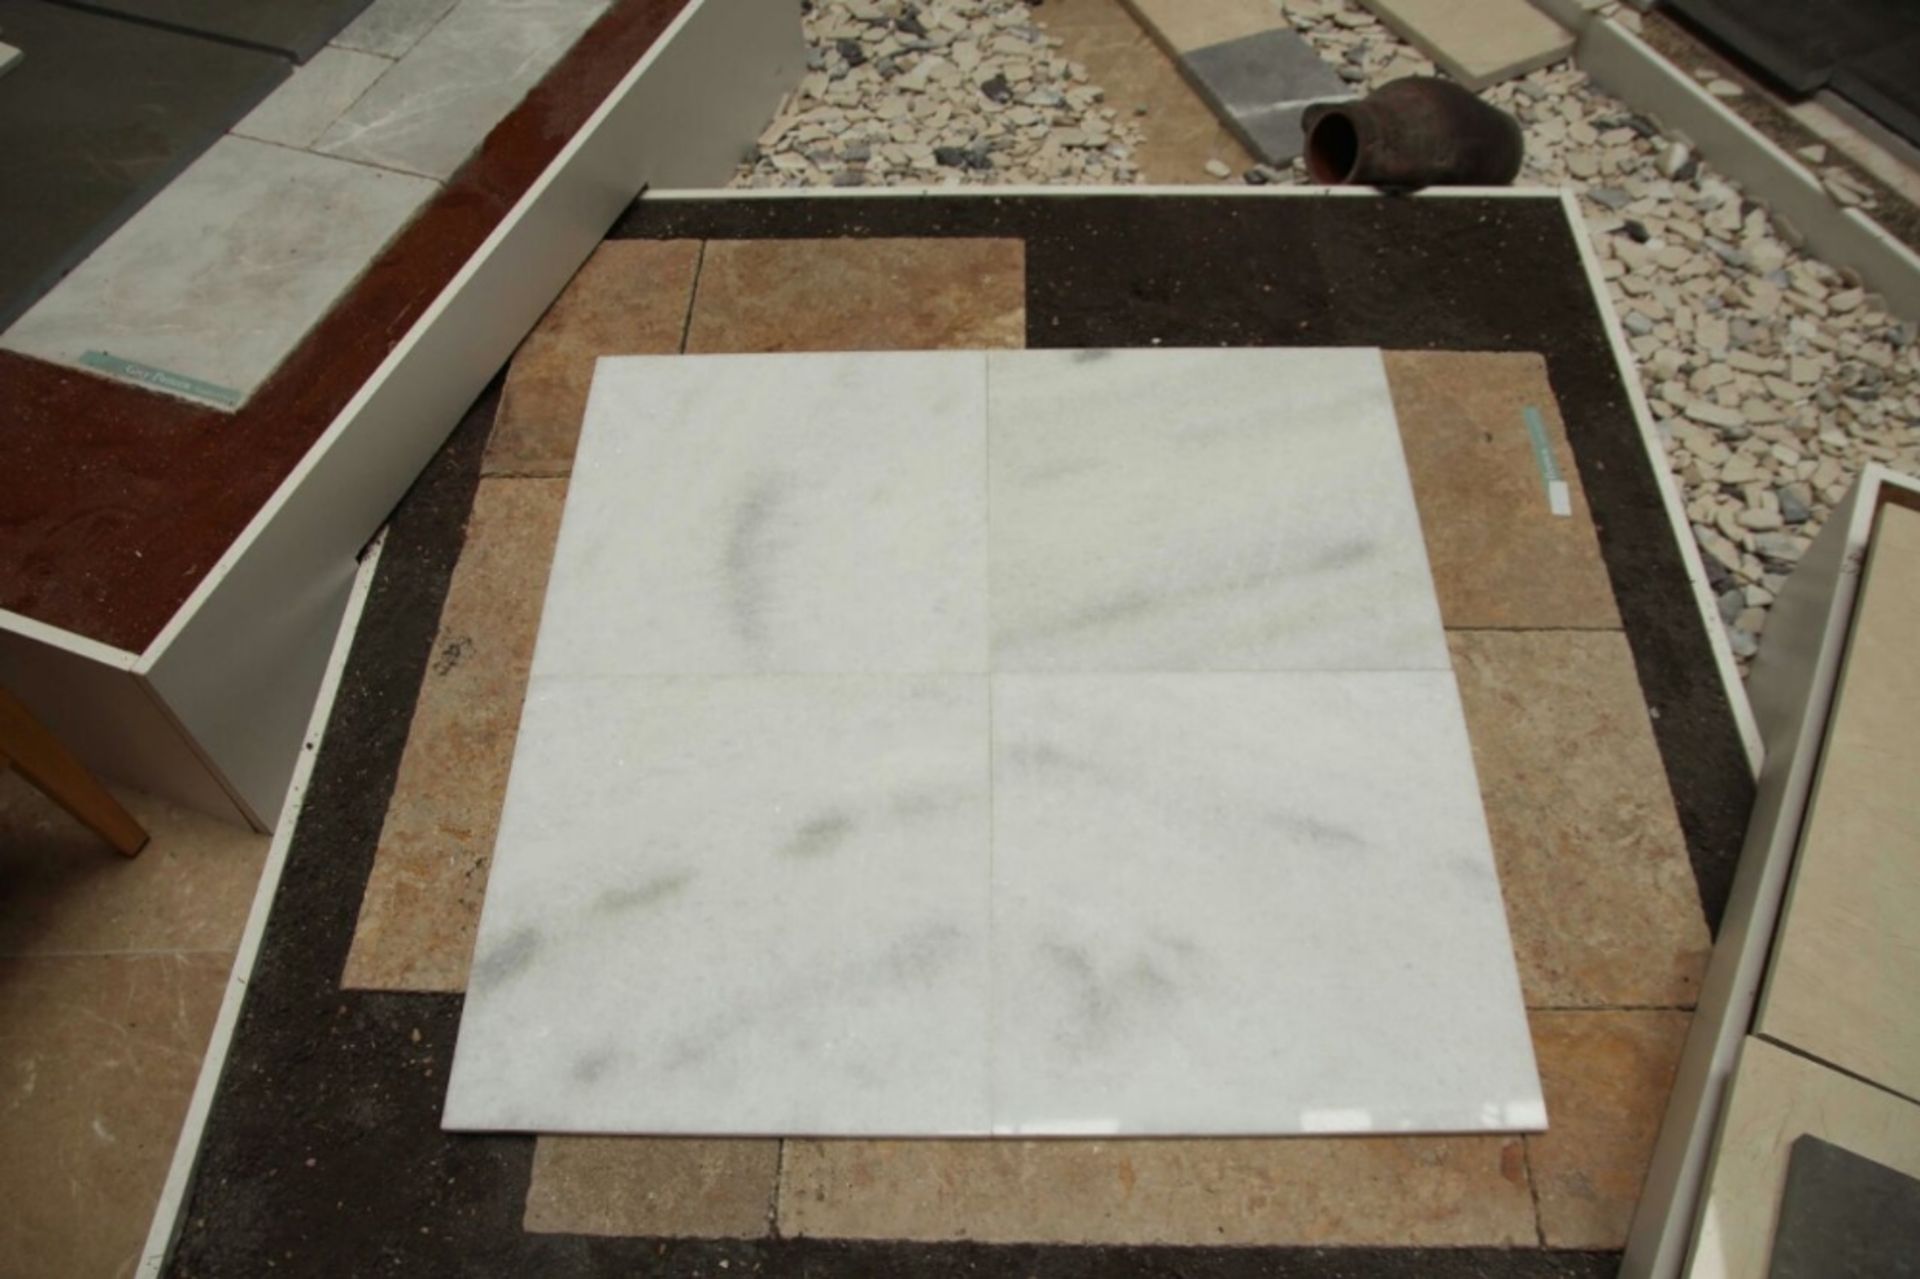 Lot containing 30 pieces (67.28 sq foot) of Polished Marble Tiles 45.7 x 45.7 x 1.25cm in Bianco - Image 2 of 4